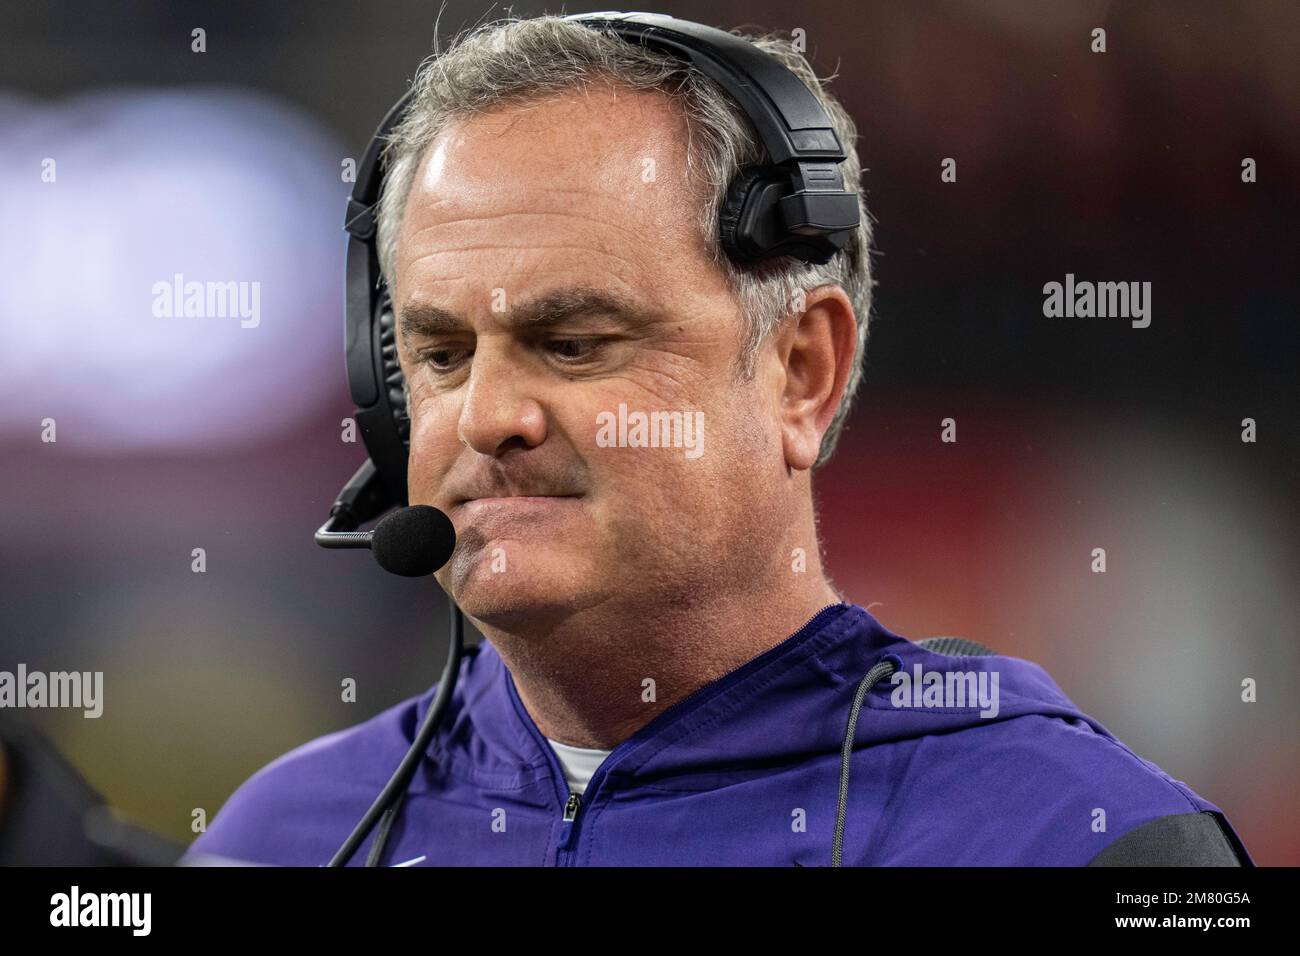 TCU Horned Frogs head coach Sonny Dykes during the College Football Playoff National Championship against the Georgia Bulldogs, Monday, January 9, 202 Stock Photo